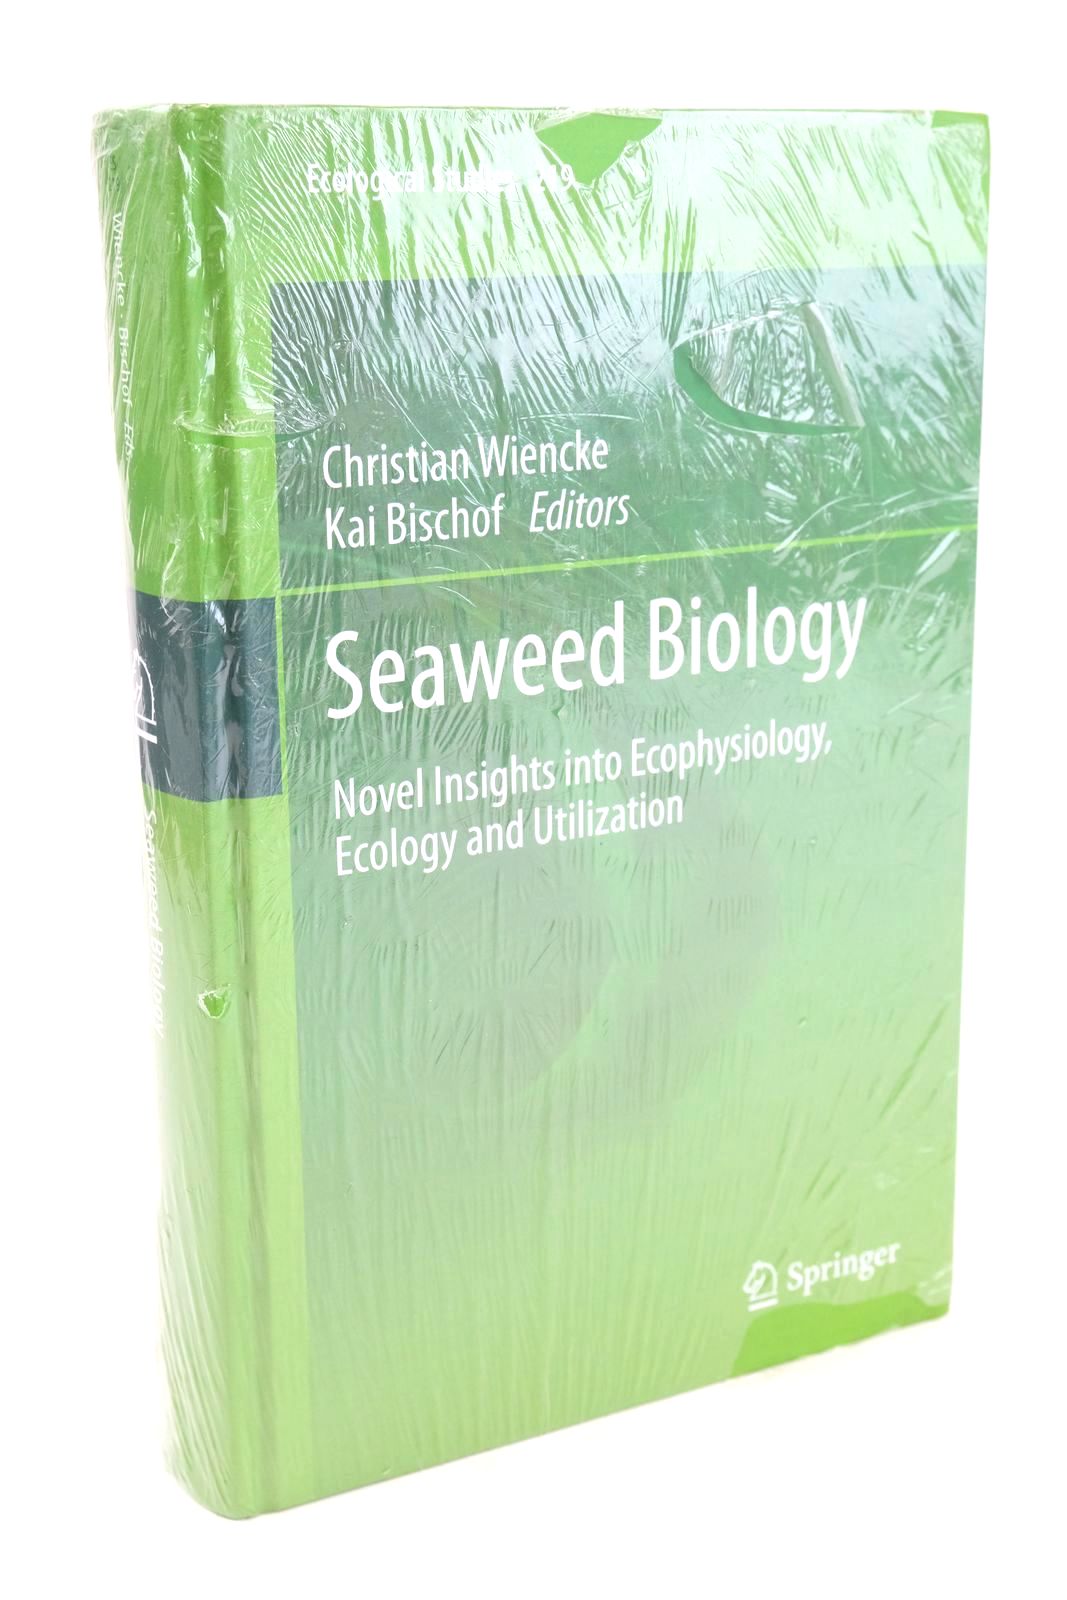 Photo of SEAWEED BIOLOGY NOVEL INSIGHTS INTO ECOPHYSIOLOGY, ECOLOGY AND UTILIZATION- Stock Number: 1324959